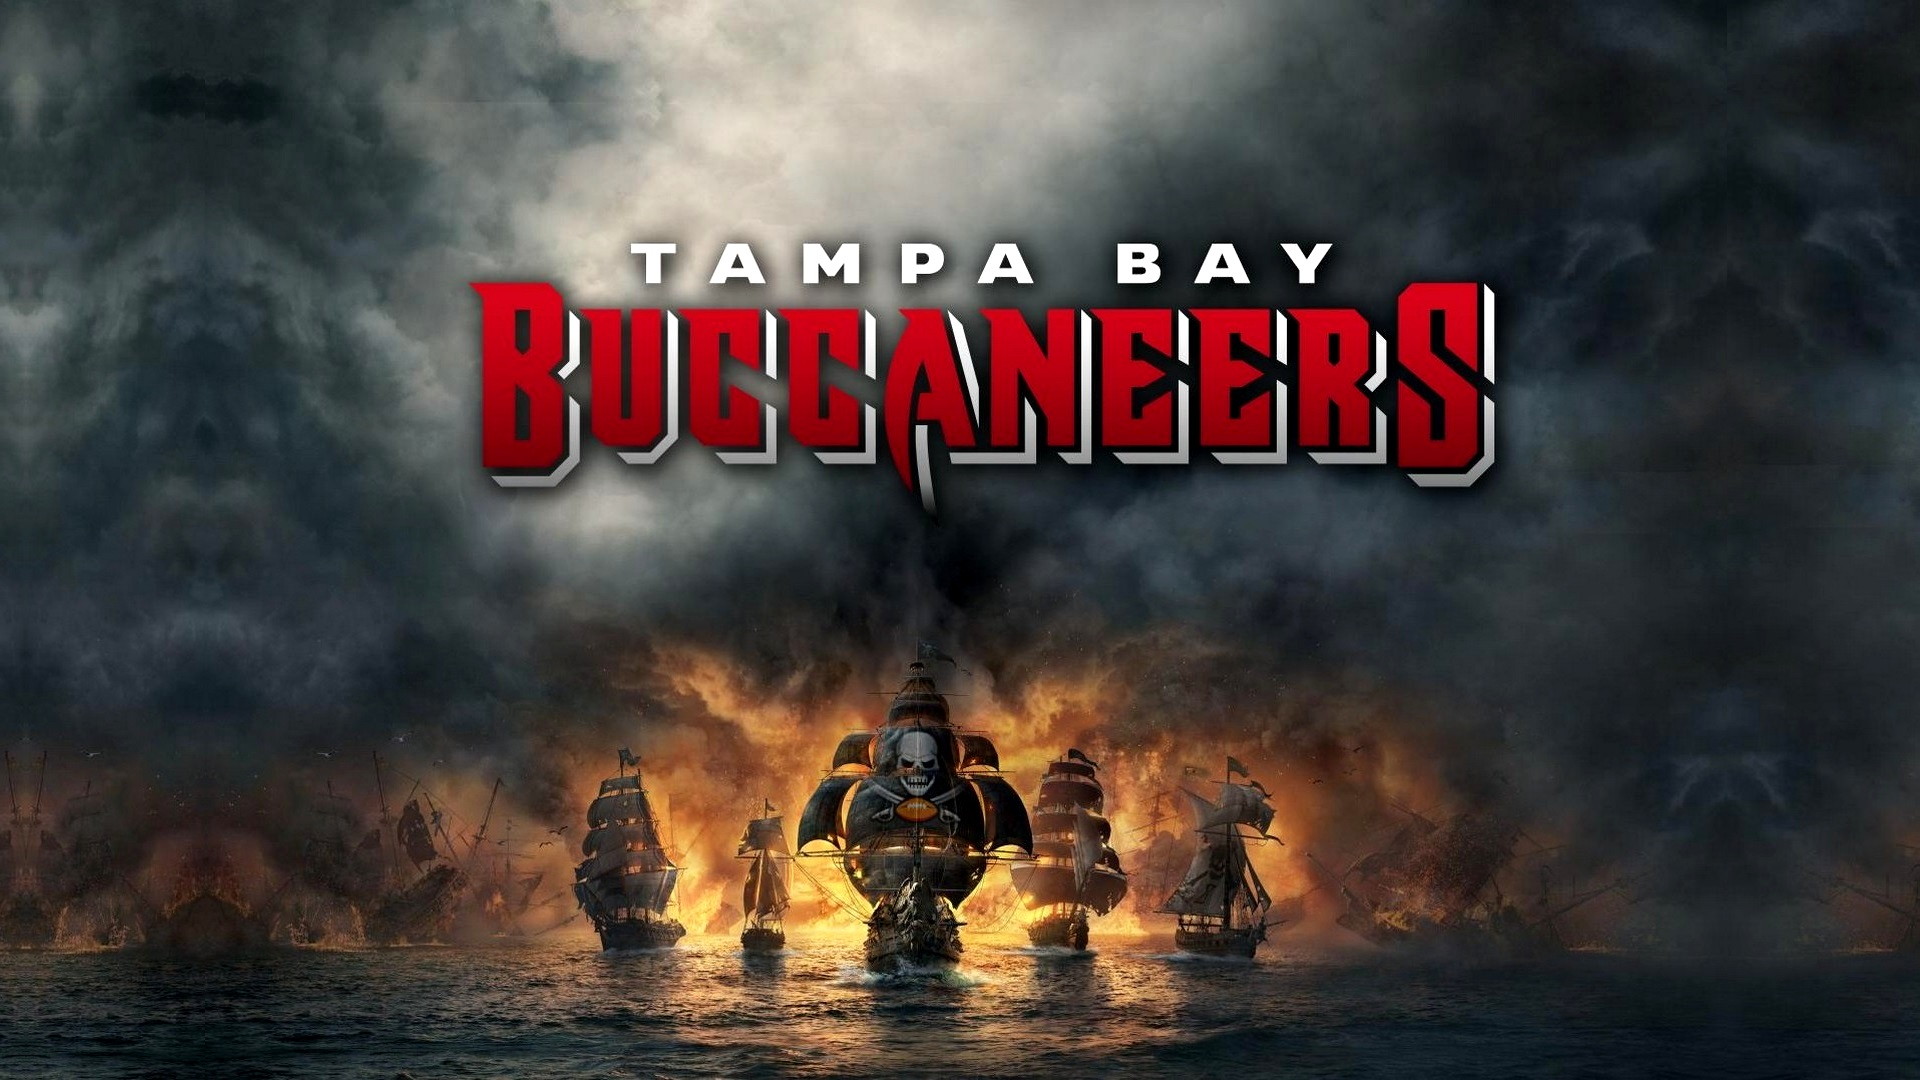 Tampa Bay Buccaneers Desktop Wallpapers With high-resolution 1920X1080 pixel. You can use and set as wallpaper for Notebook Screensavers, Mac Wallpapers, Mobile Home Screen, iPhone or Android Phones Lock Screen